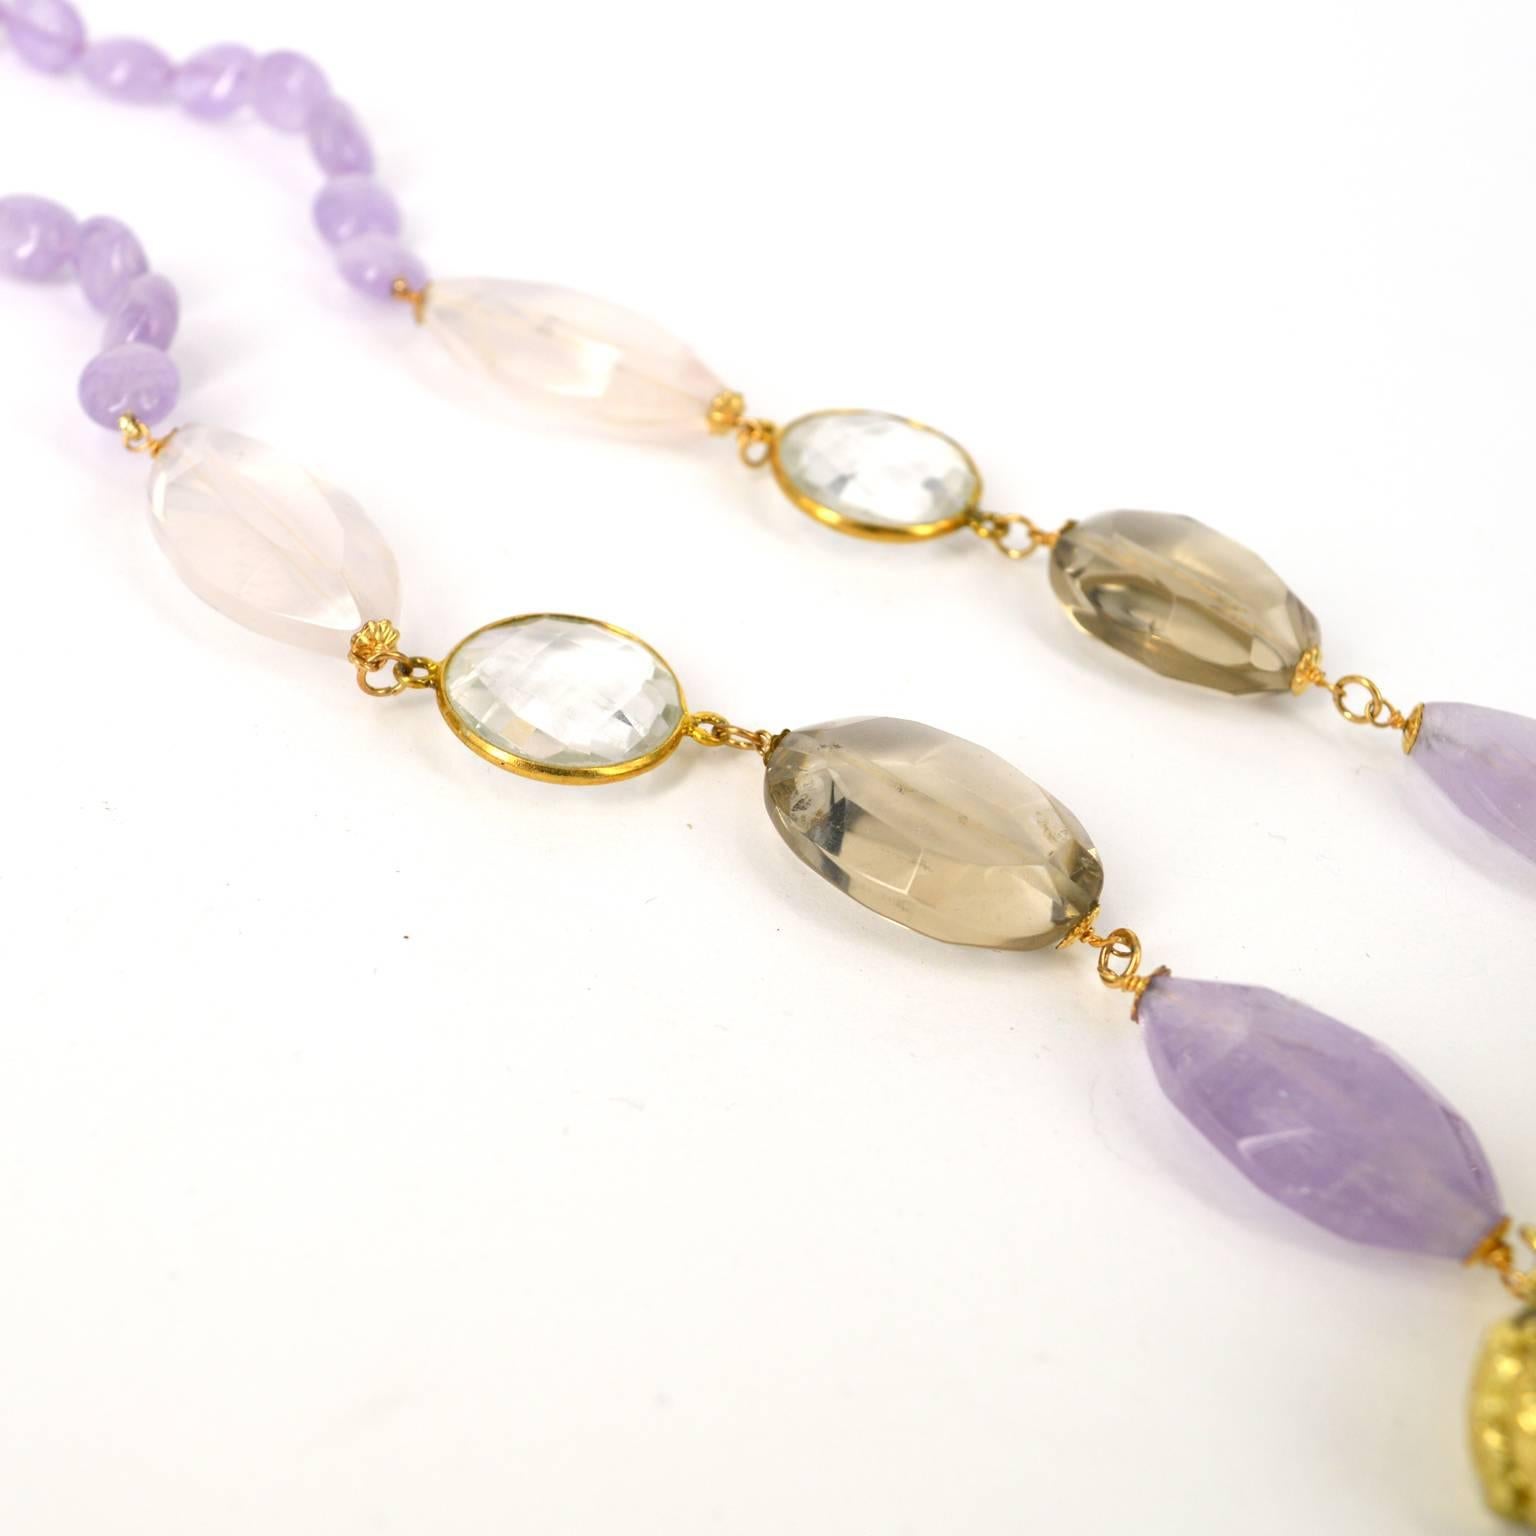 Statement natural Druzy Agate pendant with a gold colour surround is enhanced with soft natural Cape Amethyst 26mm and Rose Quartz 30mm faceted Ellipse Beads. 14k Gold filled wire and caps with hand wire wraps connect to light Smokey Quartz 23mm